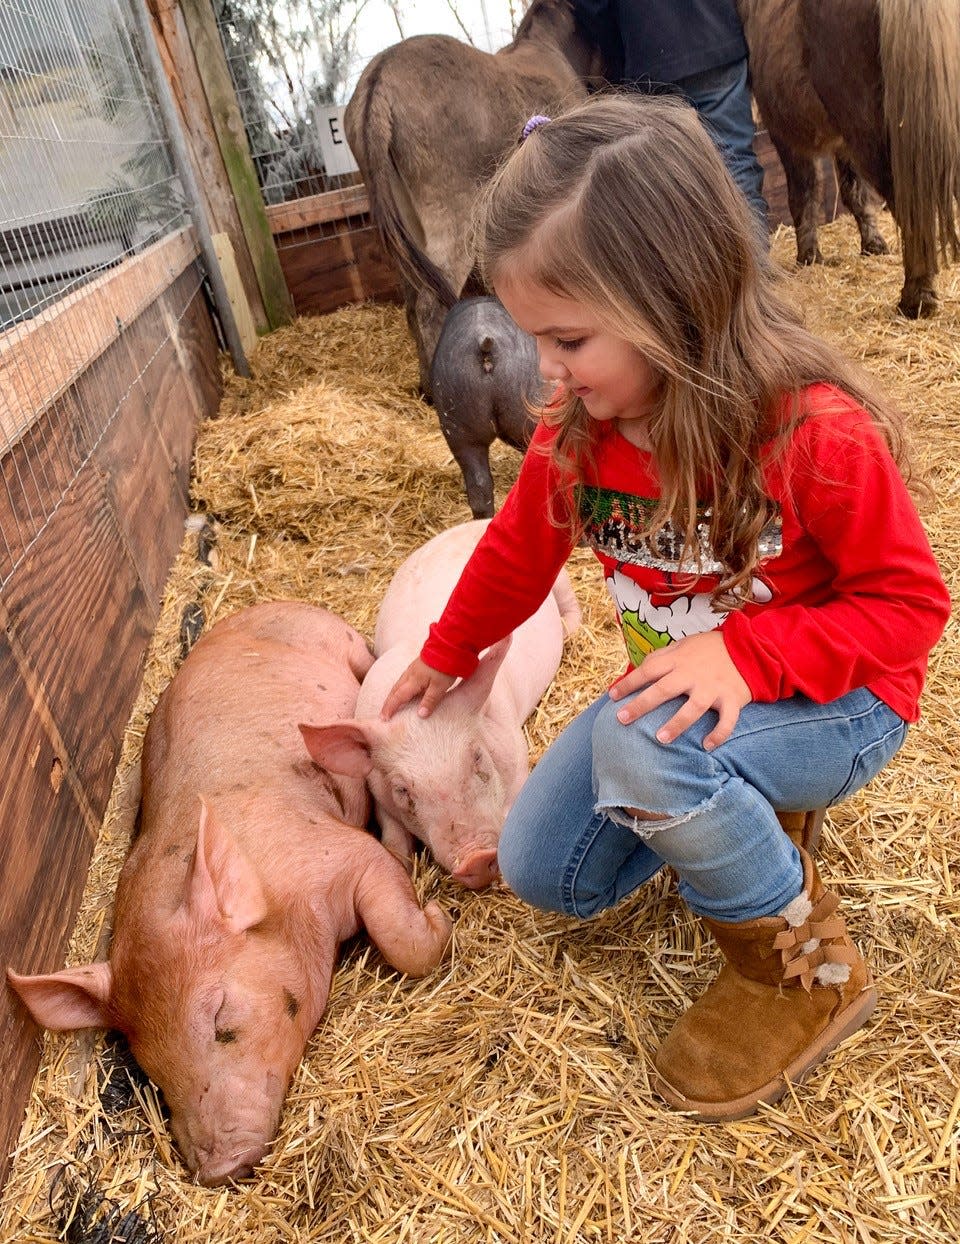 Three-year-old Wren Dabkowski of Clyde gently pets the pigs inside the new open-air petting zoo at Doebel’s Flowers on Saturday.